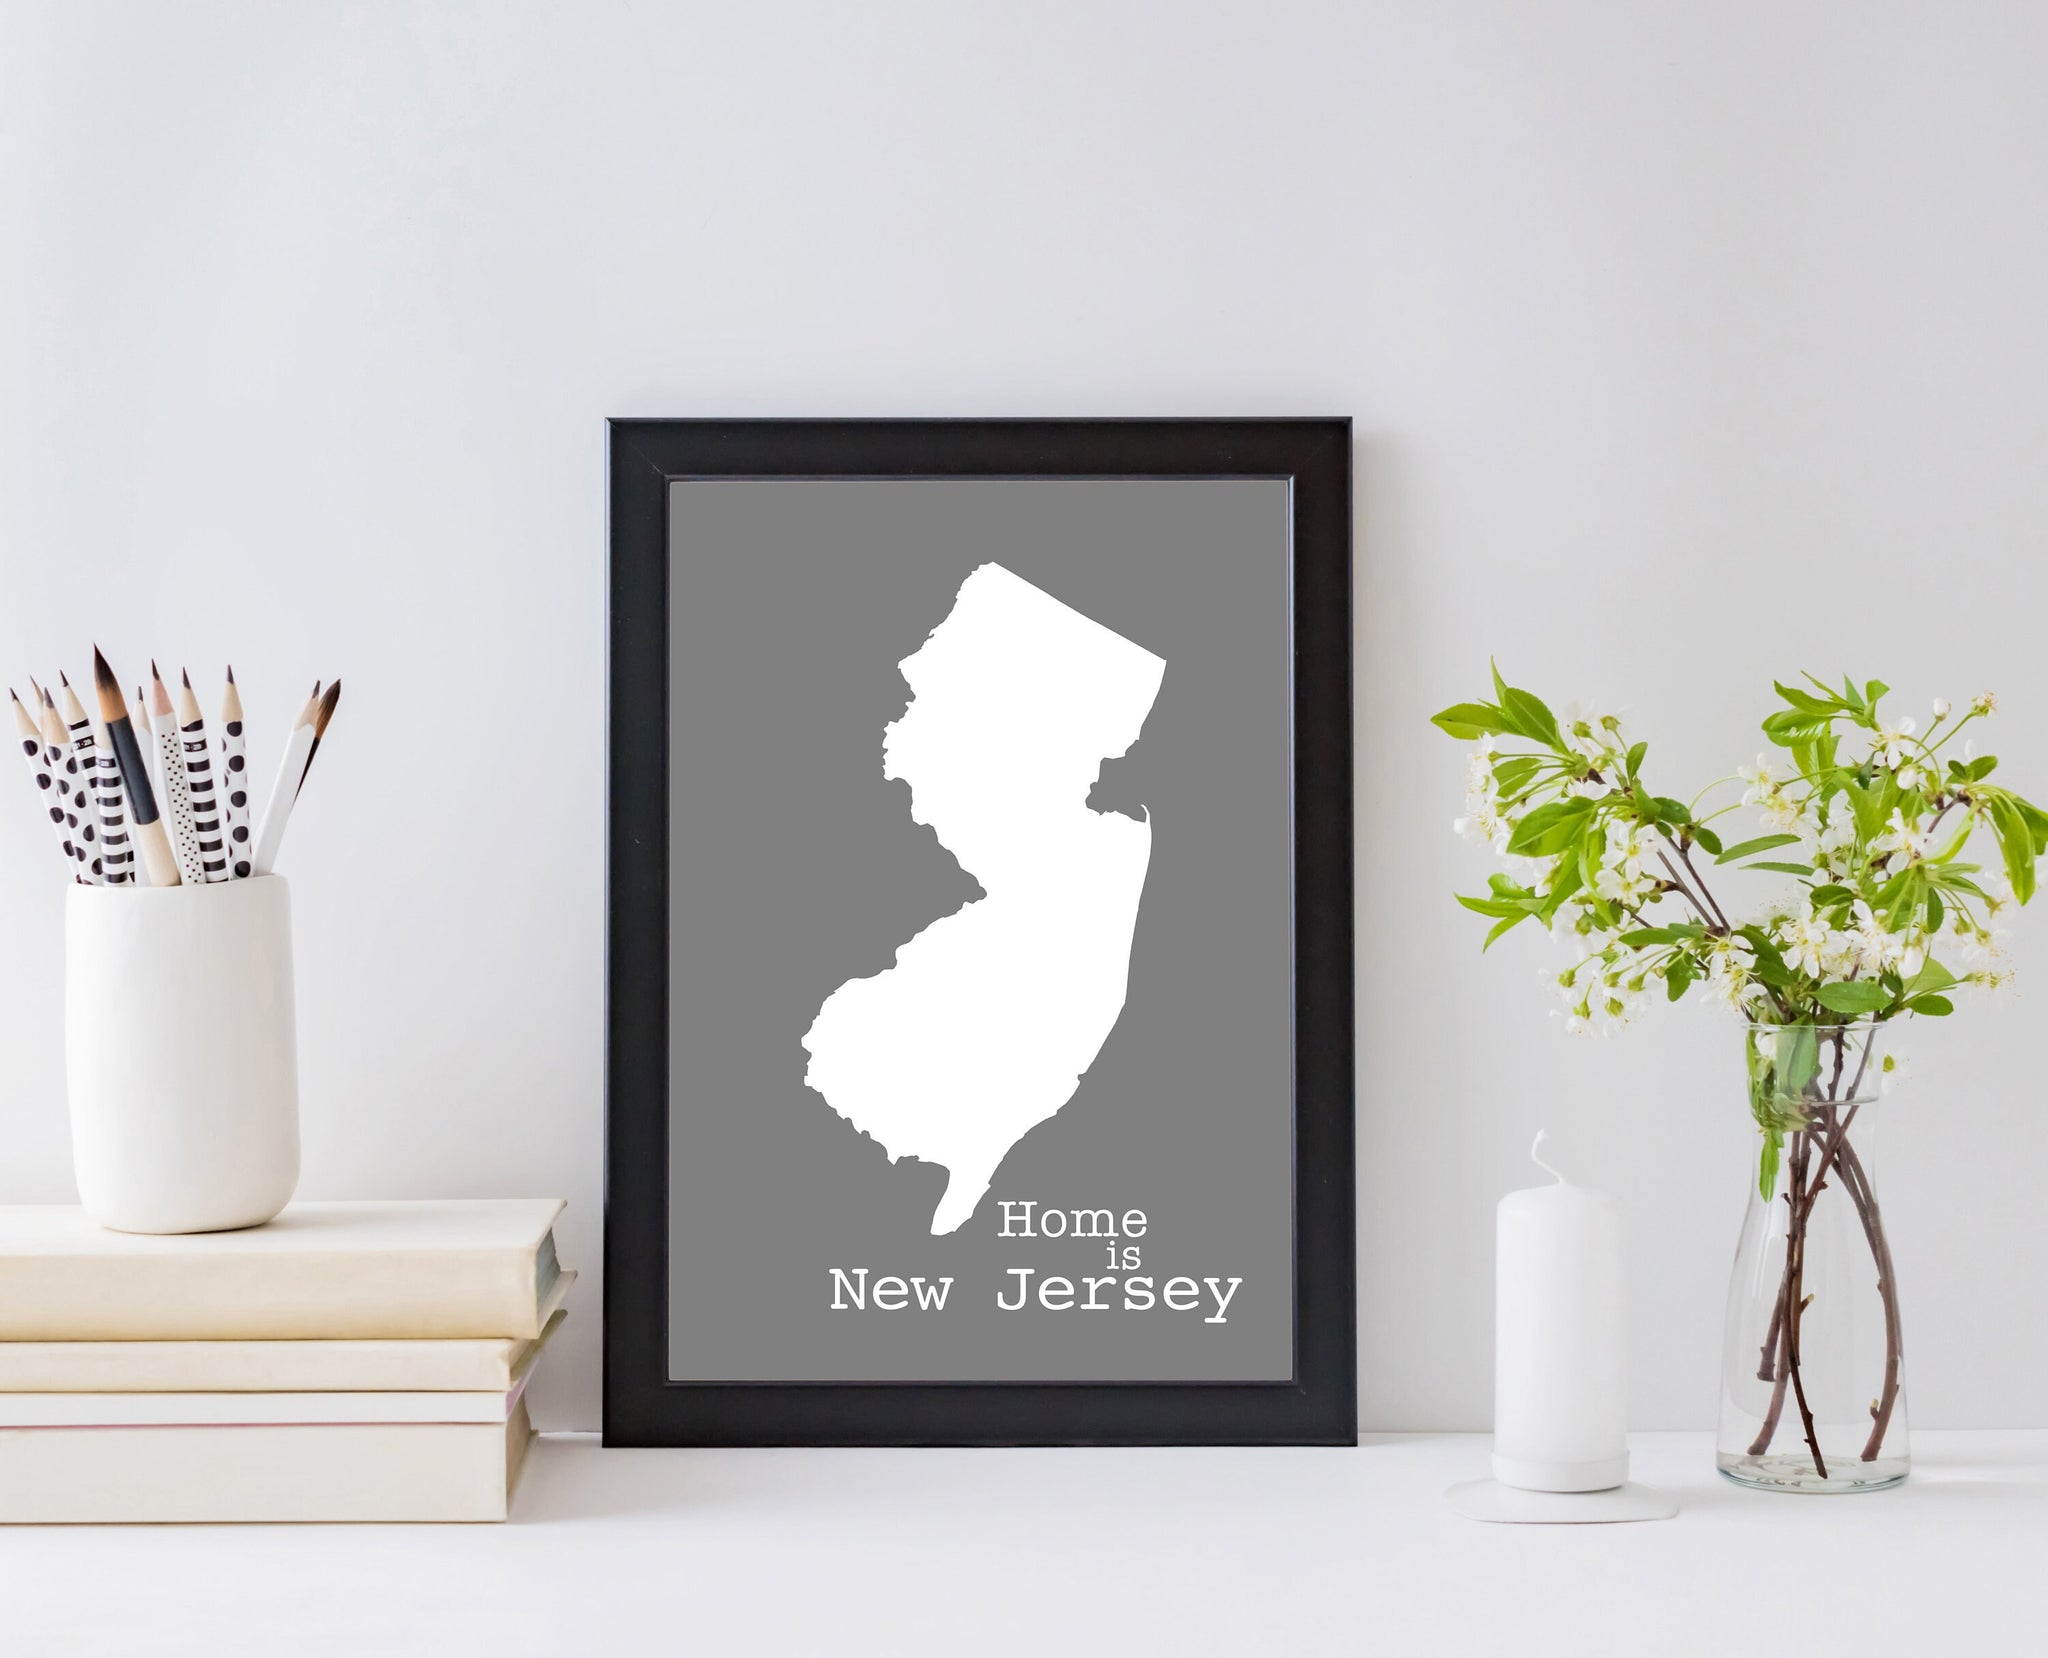 New Jersey Map Wall Art, New Jersey Modern Map Poster Print, City map wall decor, New Jersey State Poster, Family room wall decor,Office art